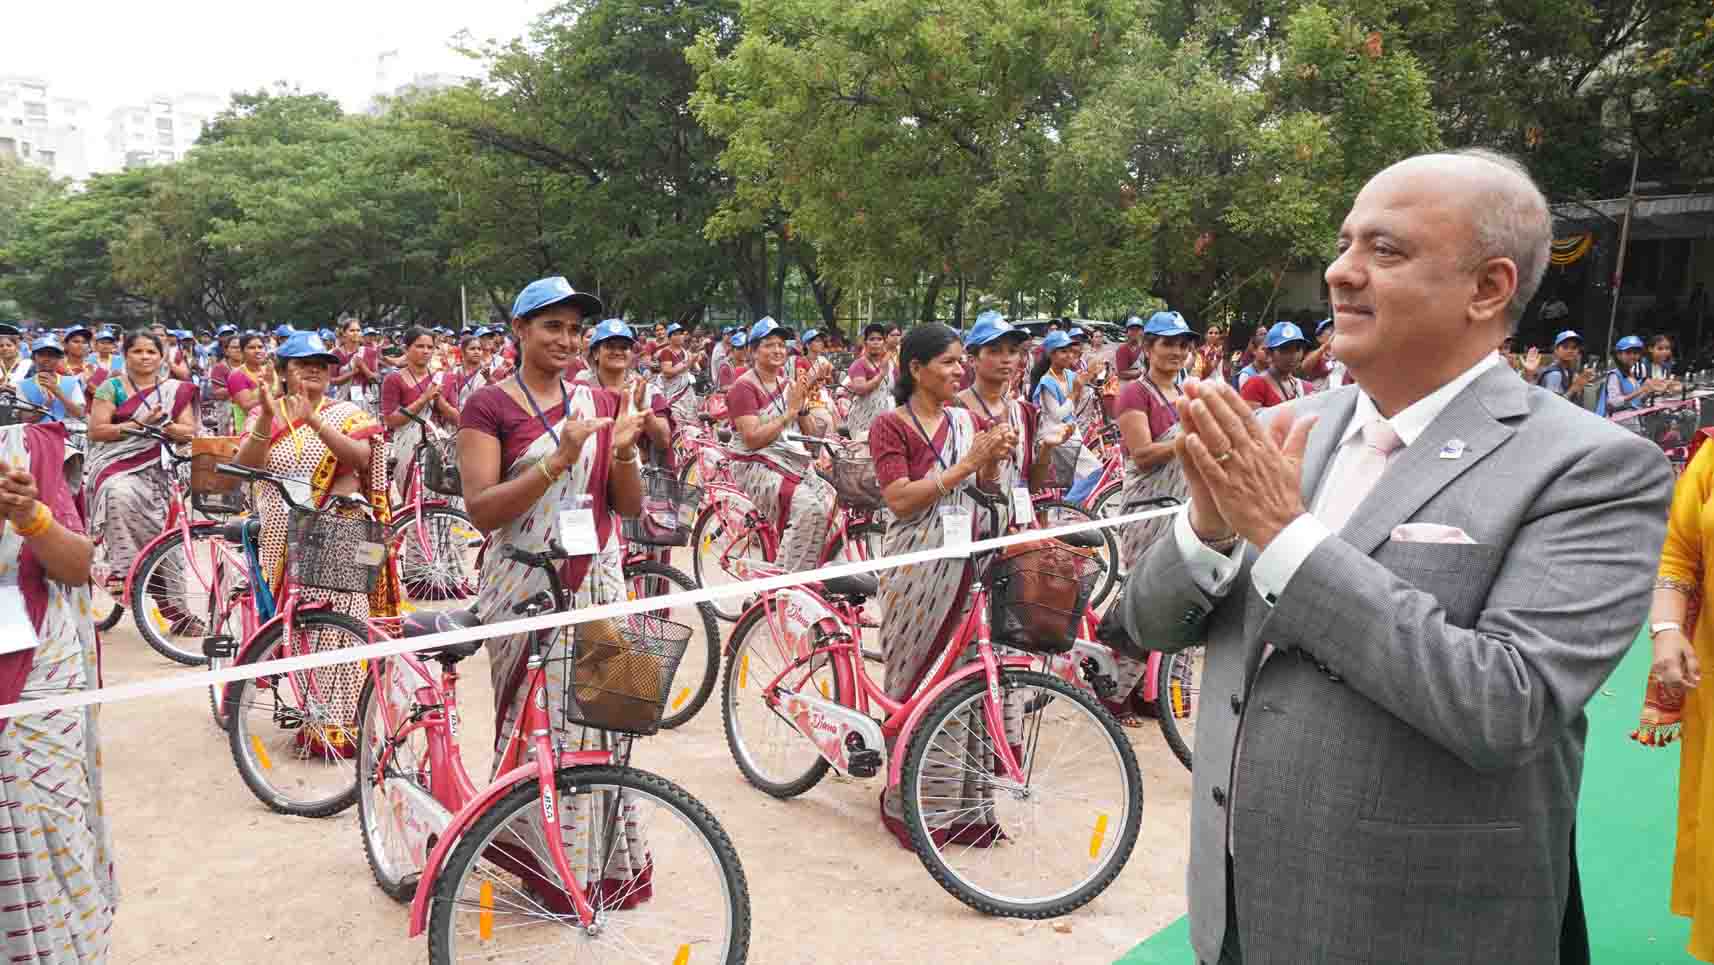 Rotary’s Bahubali Service Project of Rs 1.05 crore the Distribution of 500 Sewing Machines 500 Schools Desks 500 Bicycles and 90 Wash Stations held